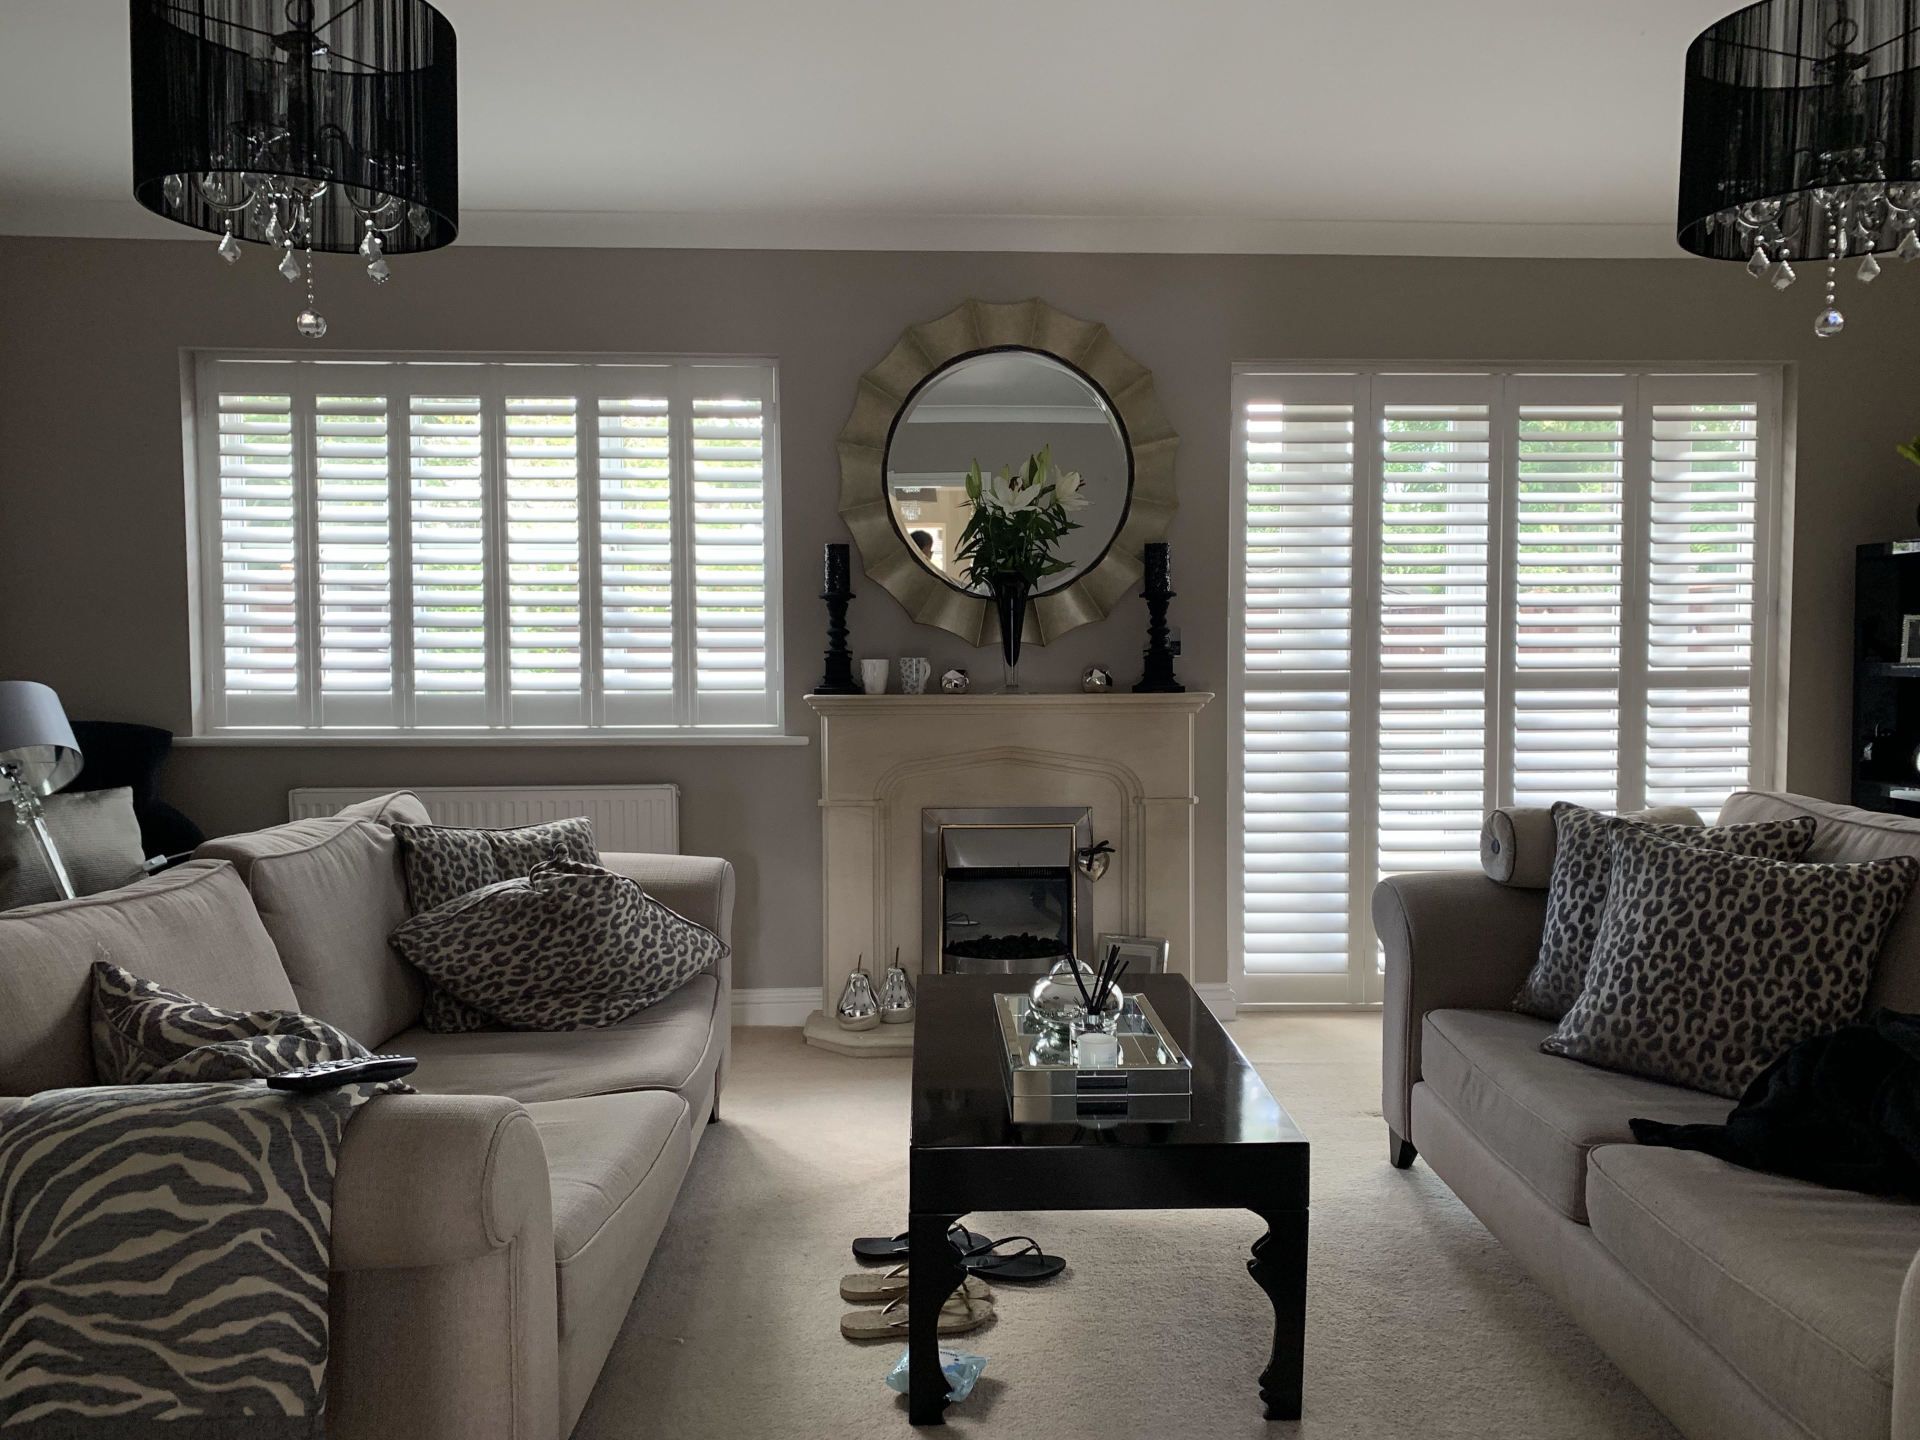 British Made Shutters available to purchase in Aldermaston | Wooden Shutters | Patio Door Shutters |  Made-to-Measure Shutters